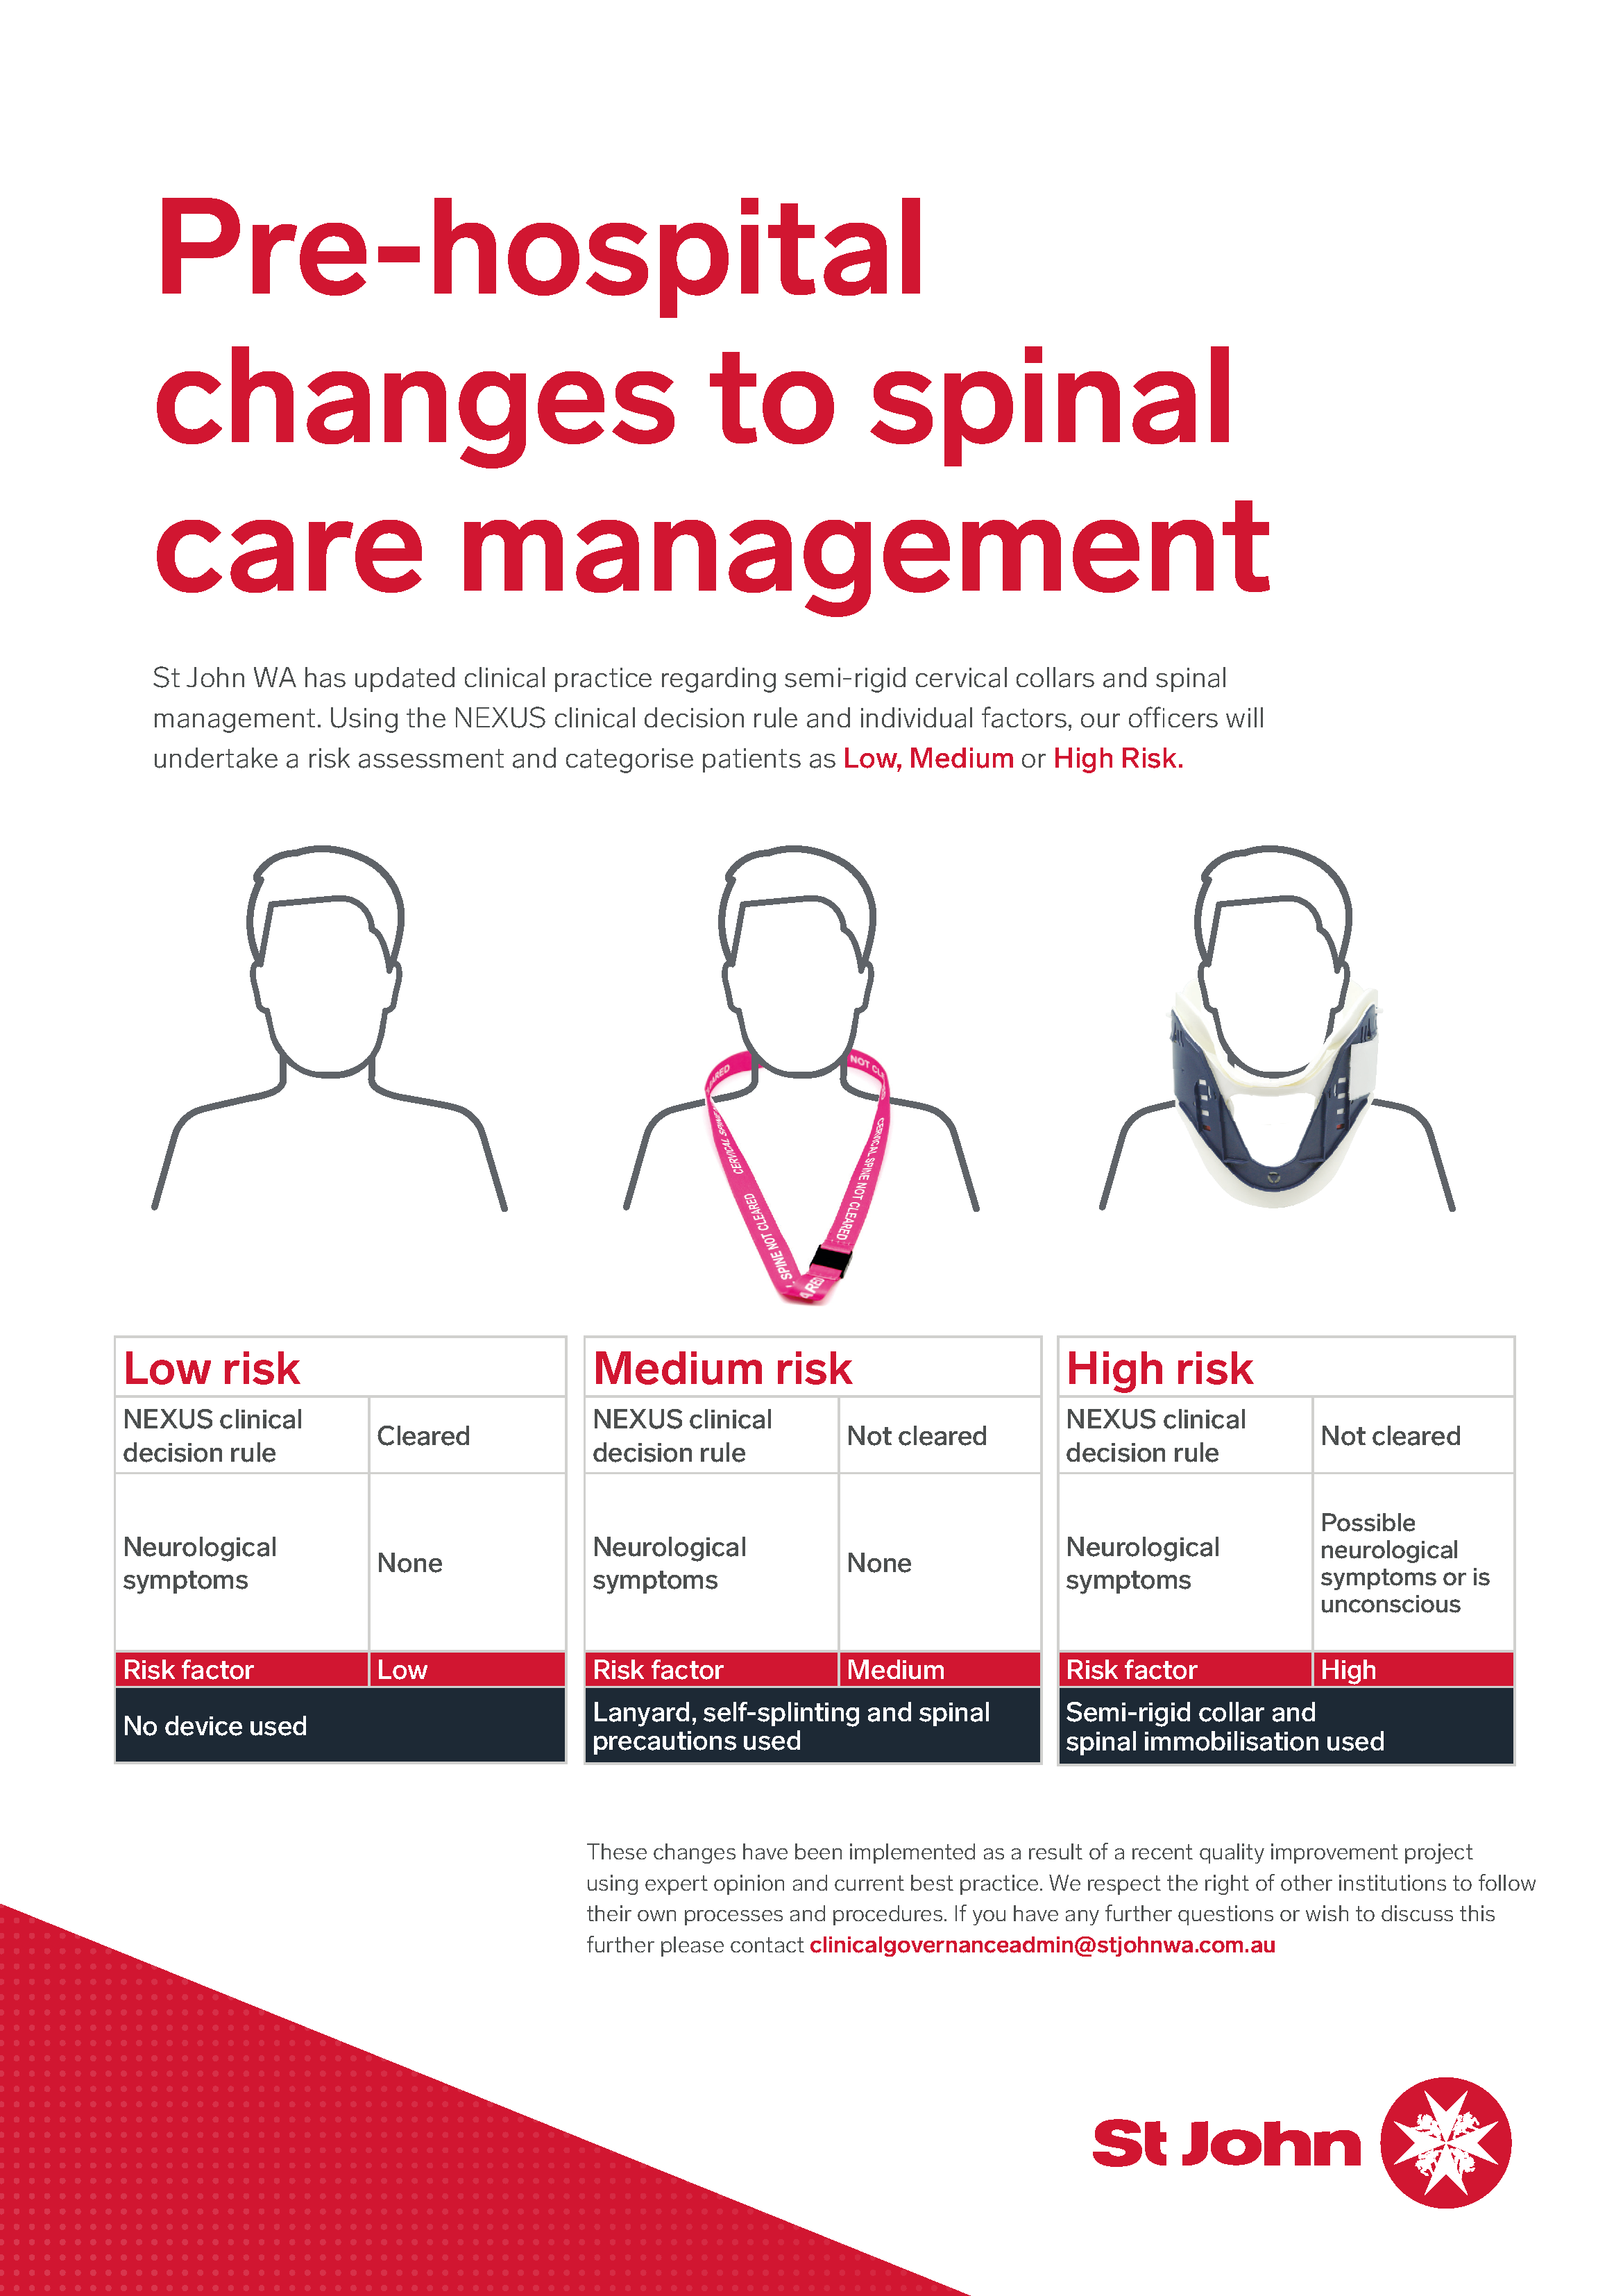 Spinal care changes_Clinical_A3 poster_FINAL